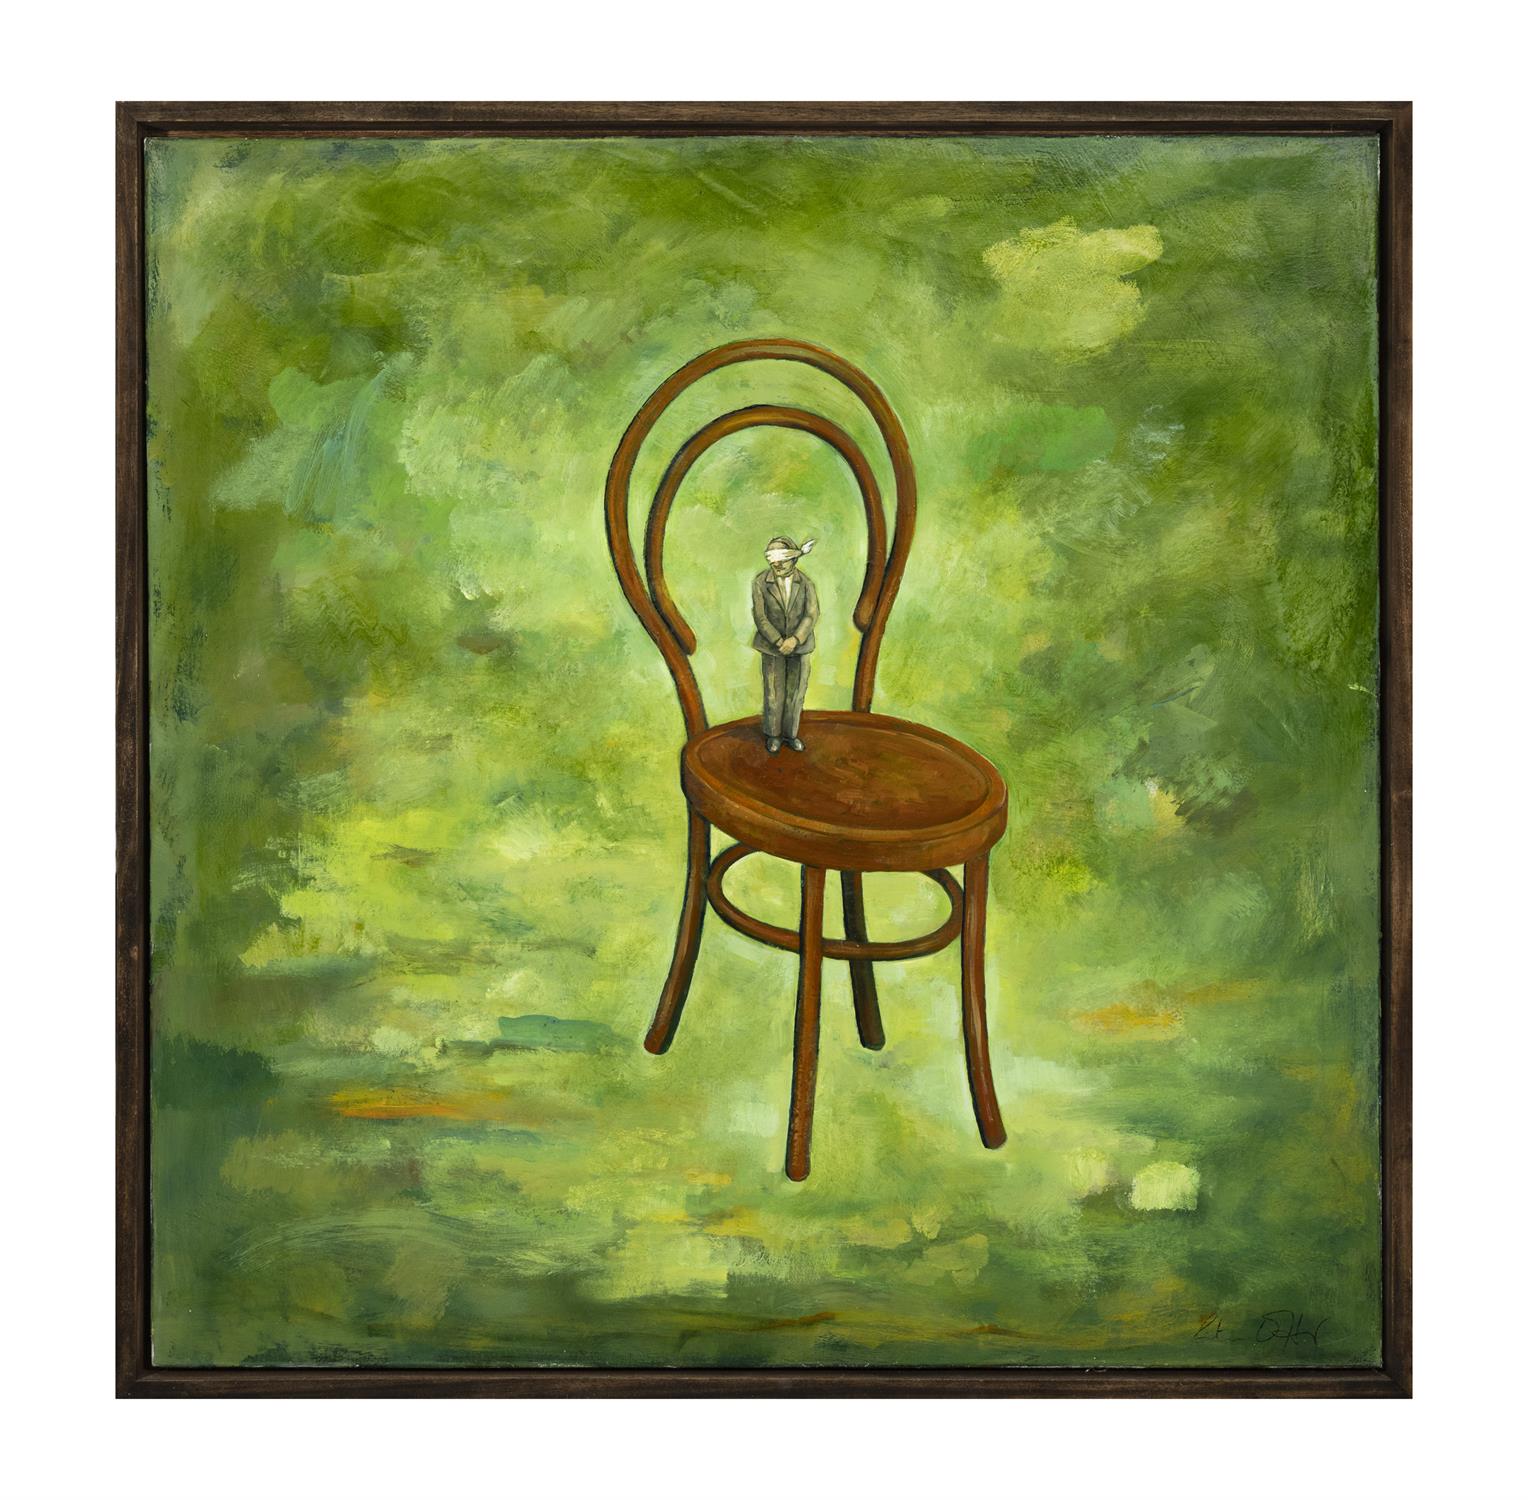 RITA DUFFY Connolly's Chair Oil on linen, 90 x 90cm Signed, inscribed and dated 2016 verso - Image 2 of 4